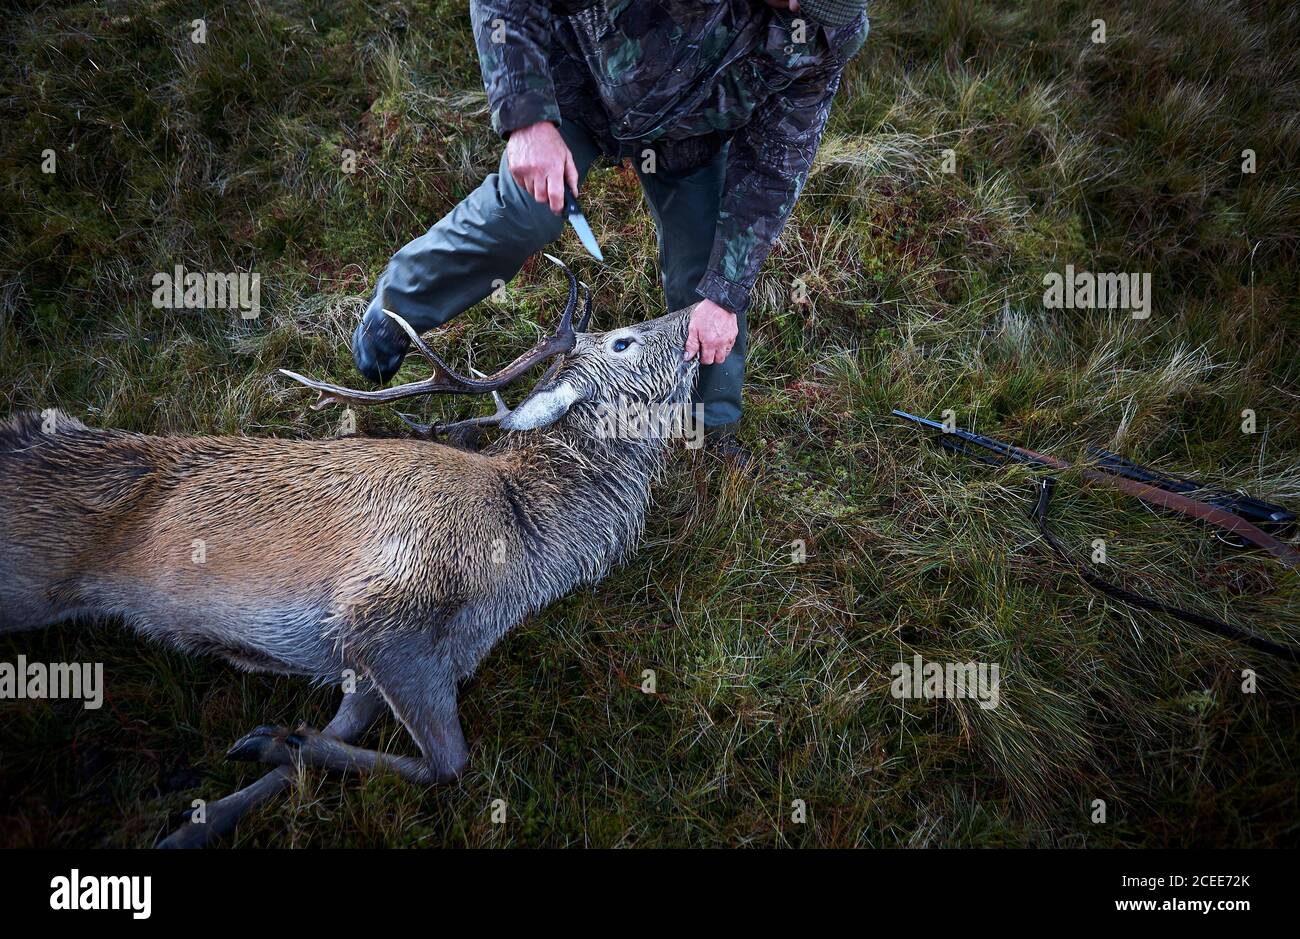 A hunter holding a knife in his hand preparing to skin a dead deer after he killed it on a hunting trip in Scotland. Stock Photo